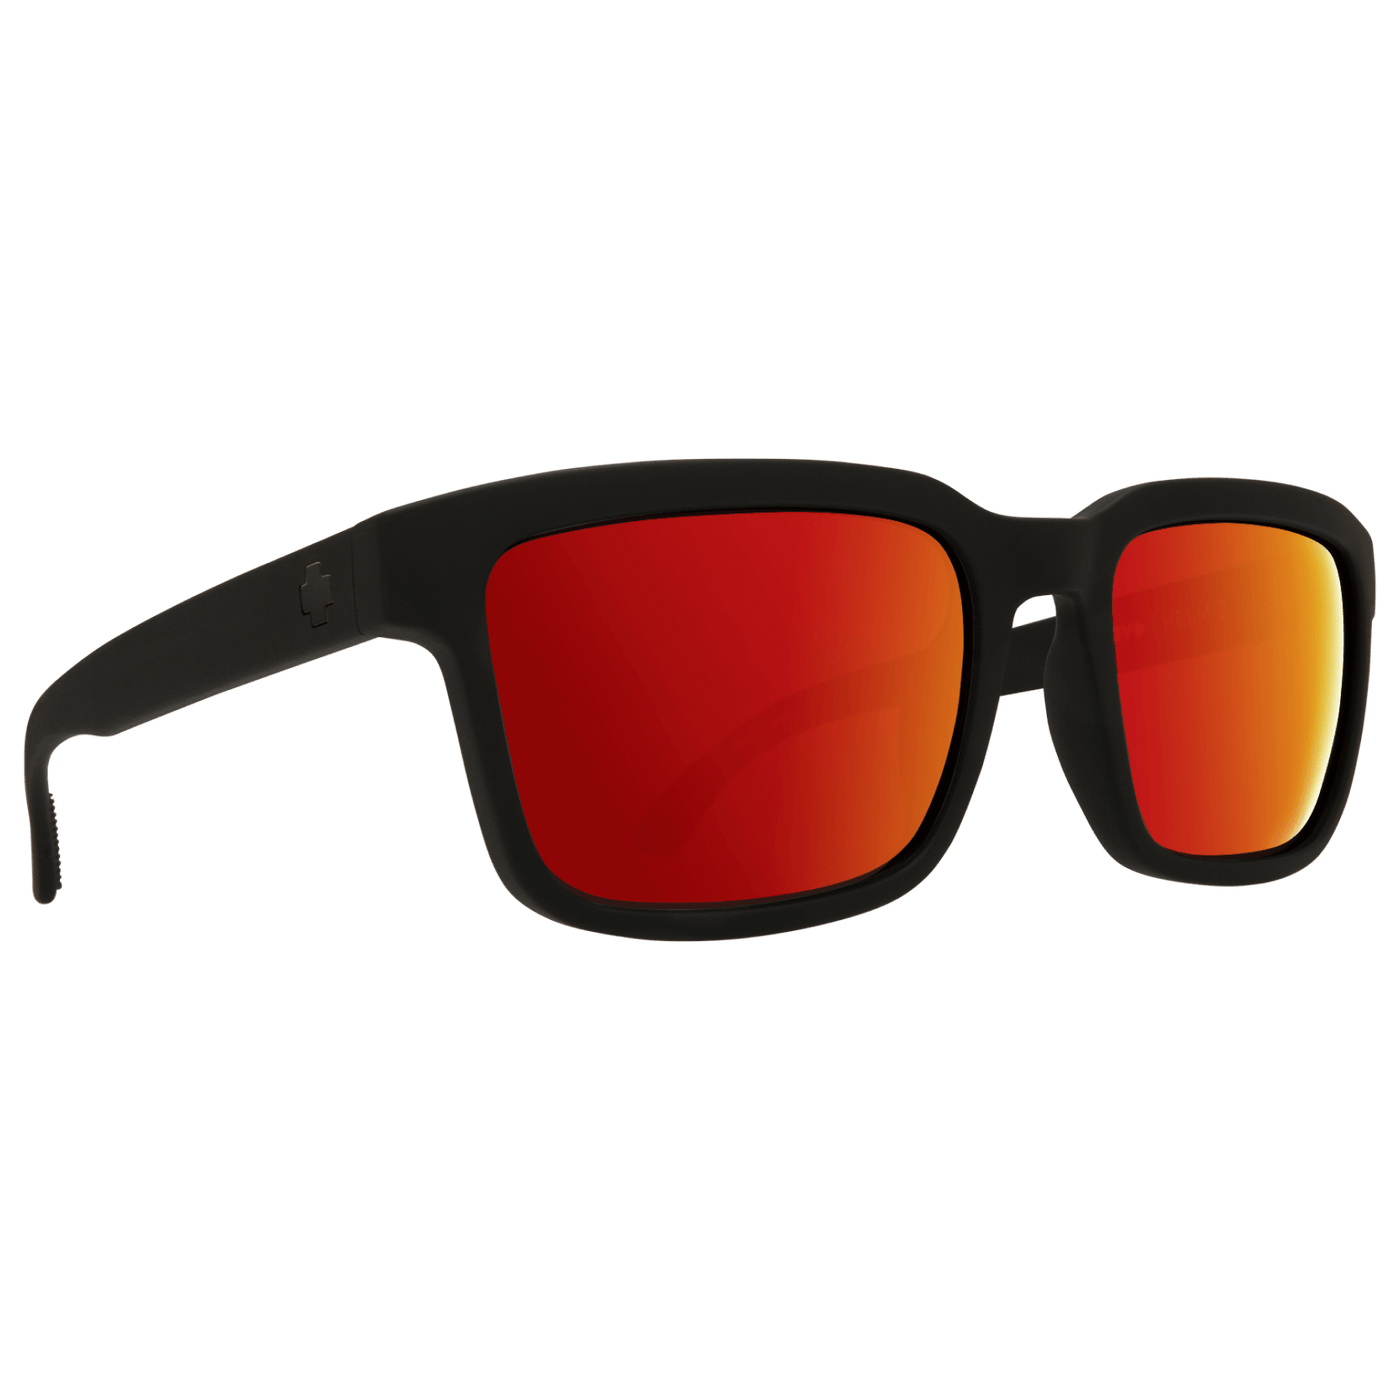 SPY HELM 2 Sunglasses, Happy Lens - Red 8Lines Shop - Fast Shipping